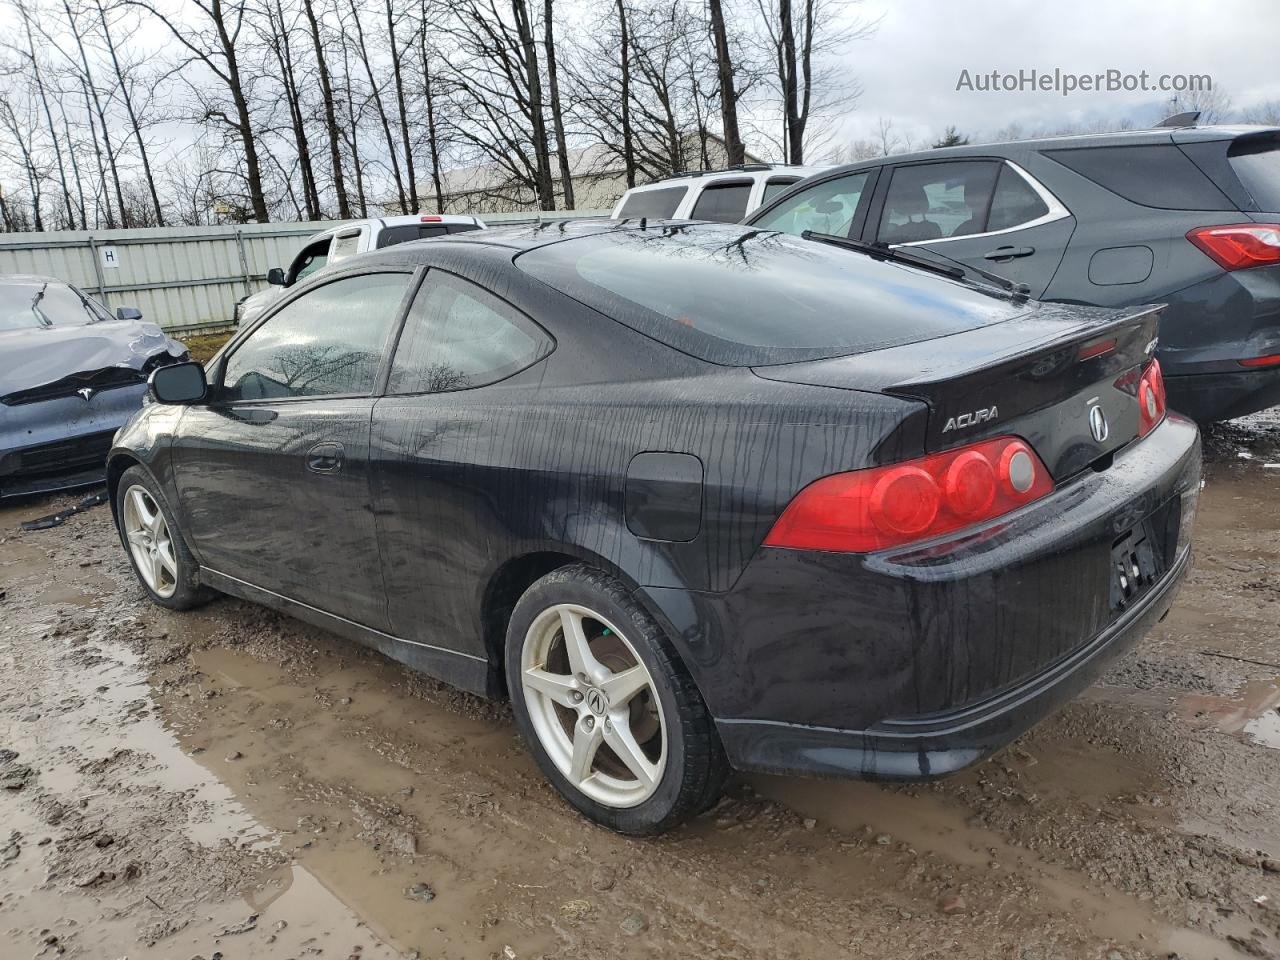 2006 Acura Rsx Type-s Charcoal vin: JH4DC53096S021233